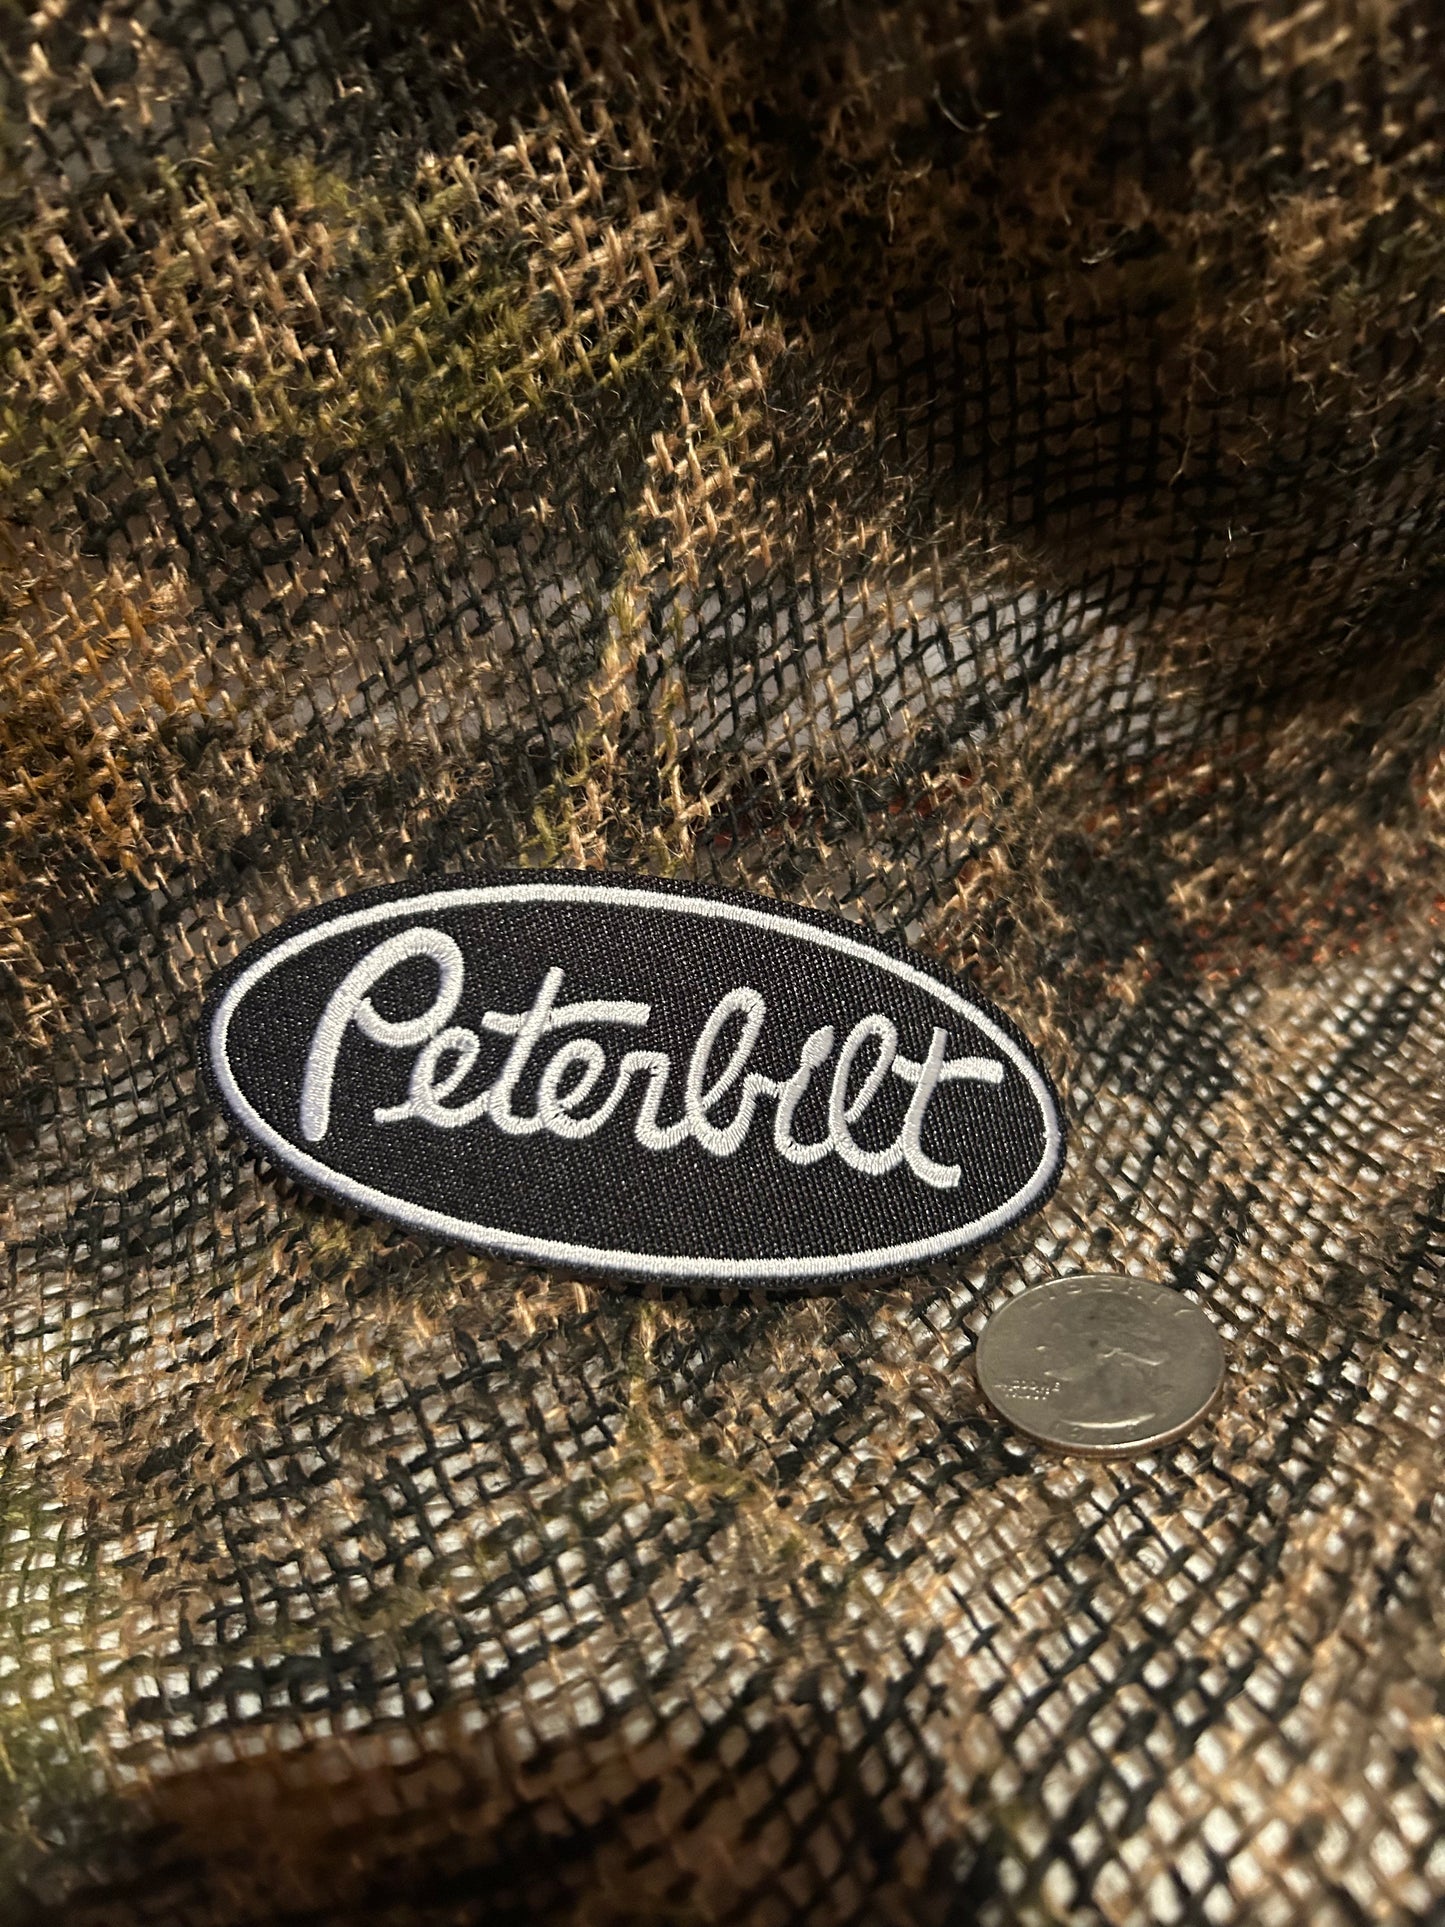 Peterlift trucking patch